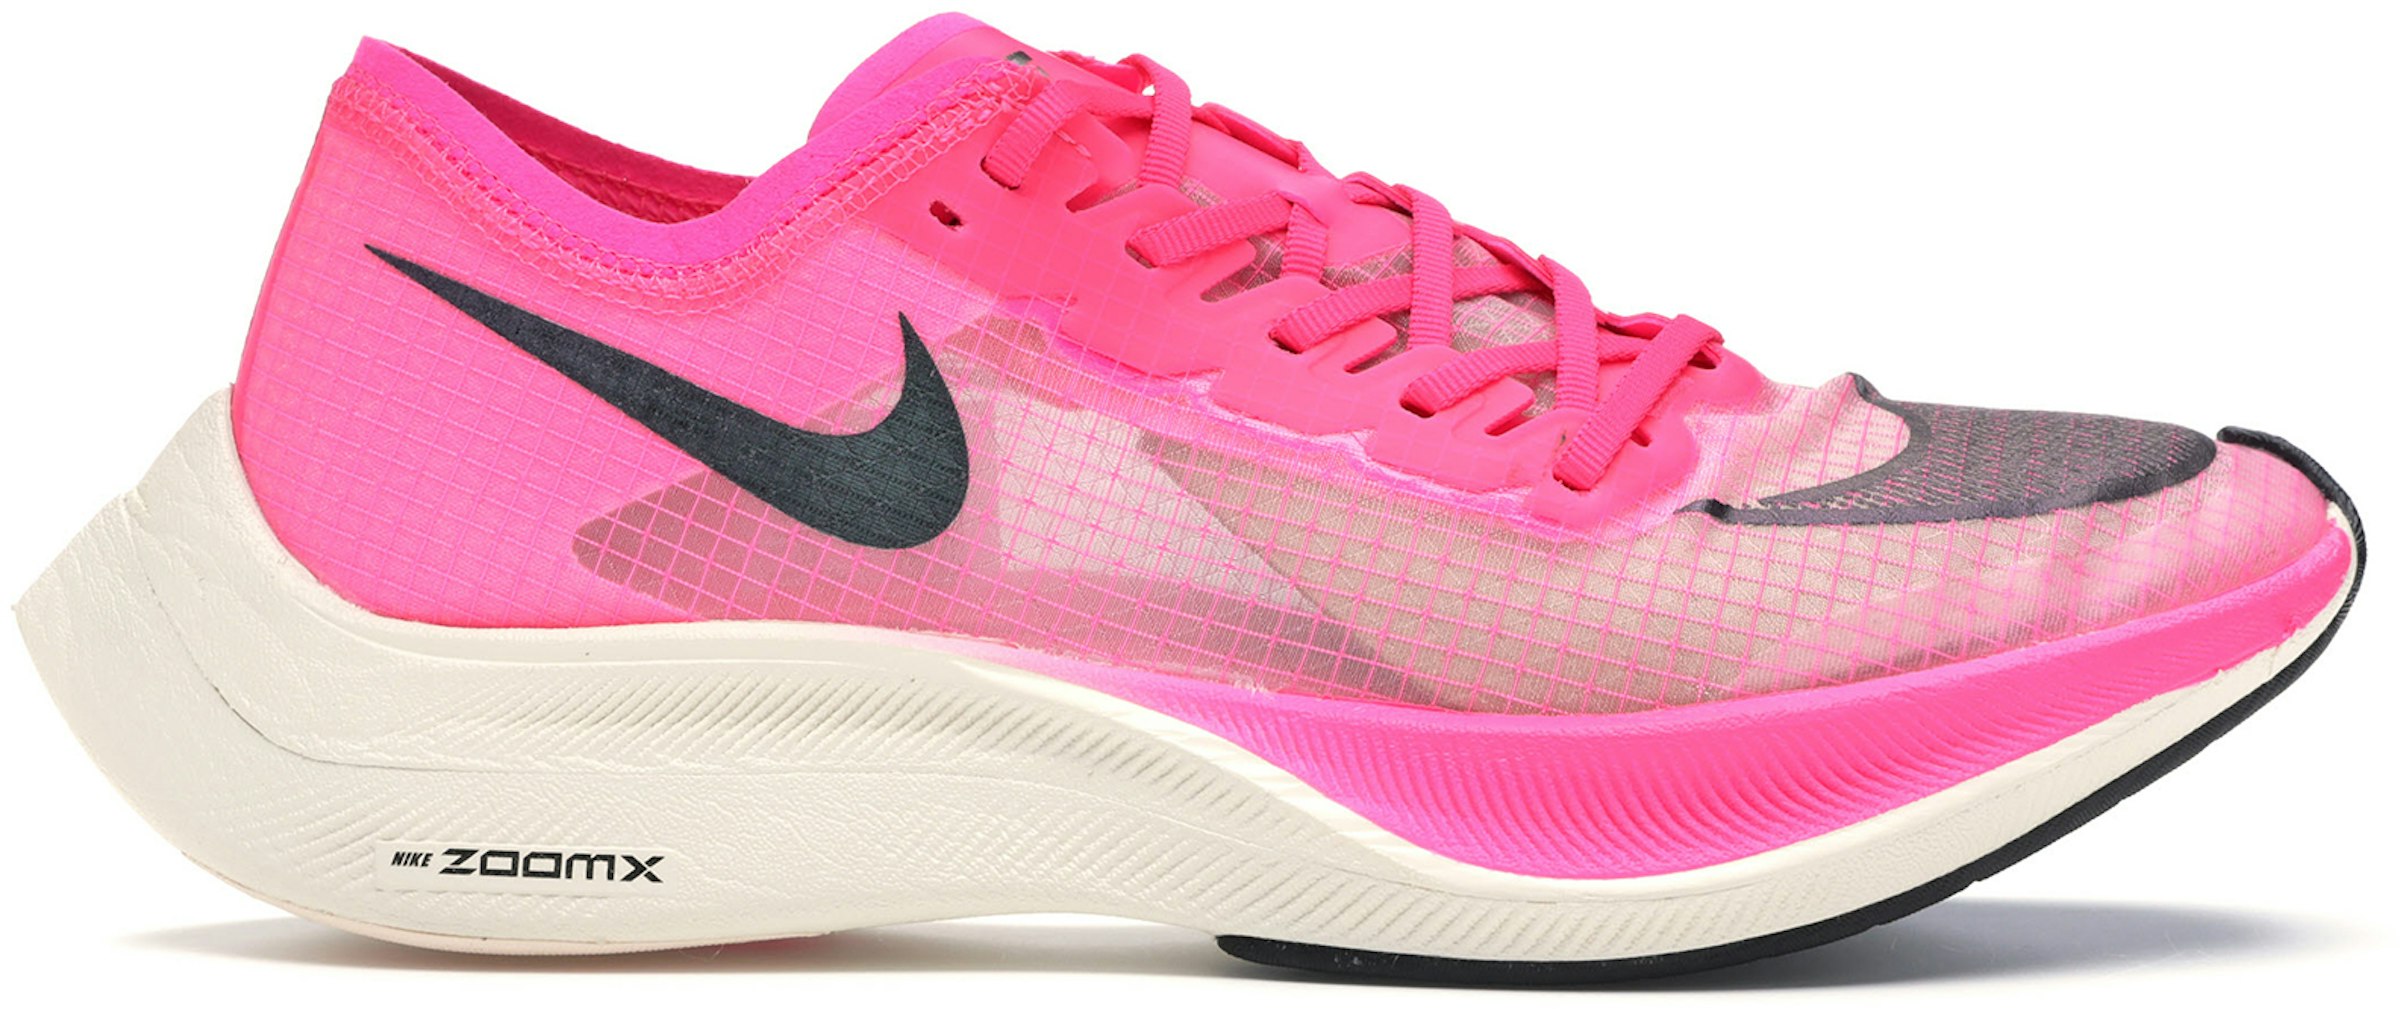 ZoomX Vaporfly Next% Pink - - US